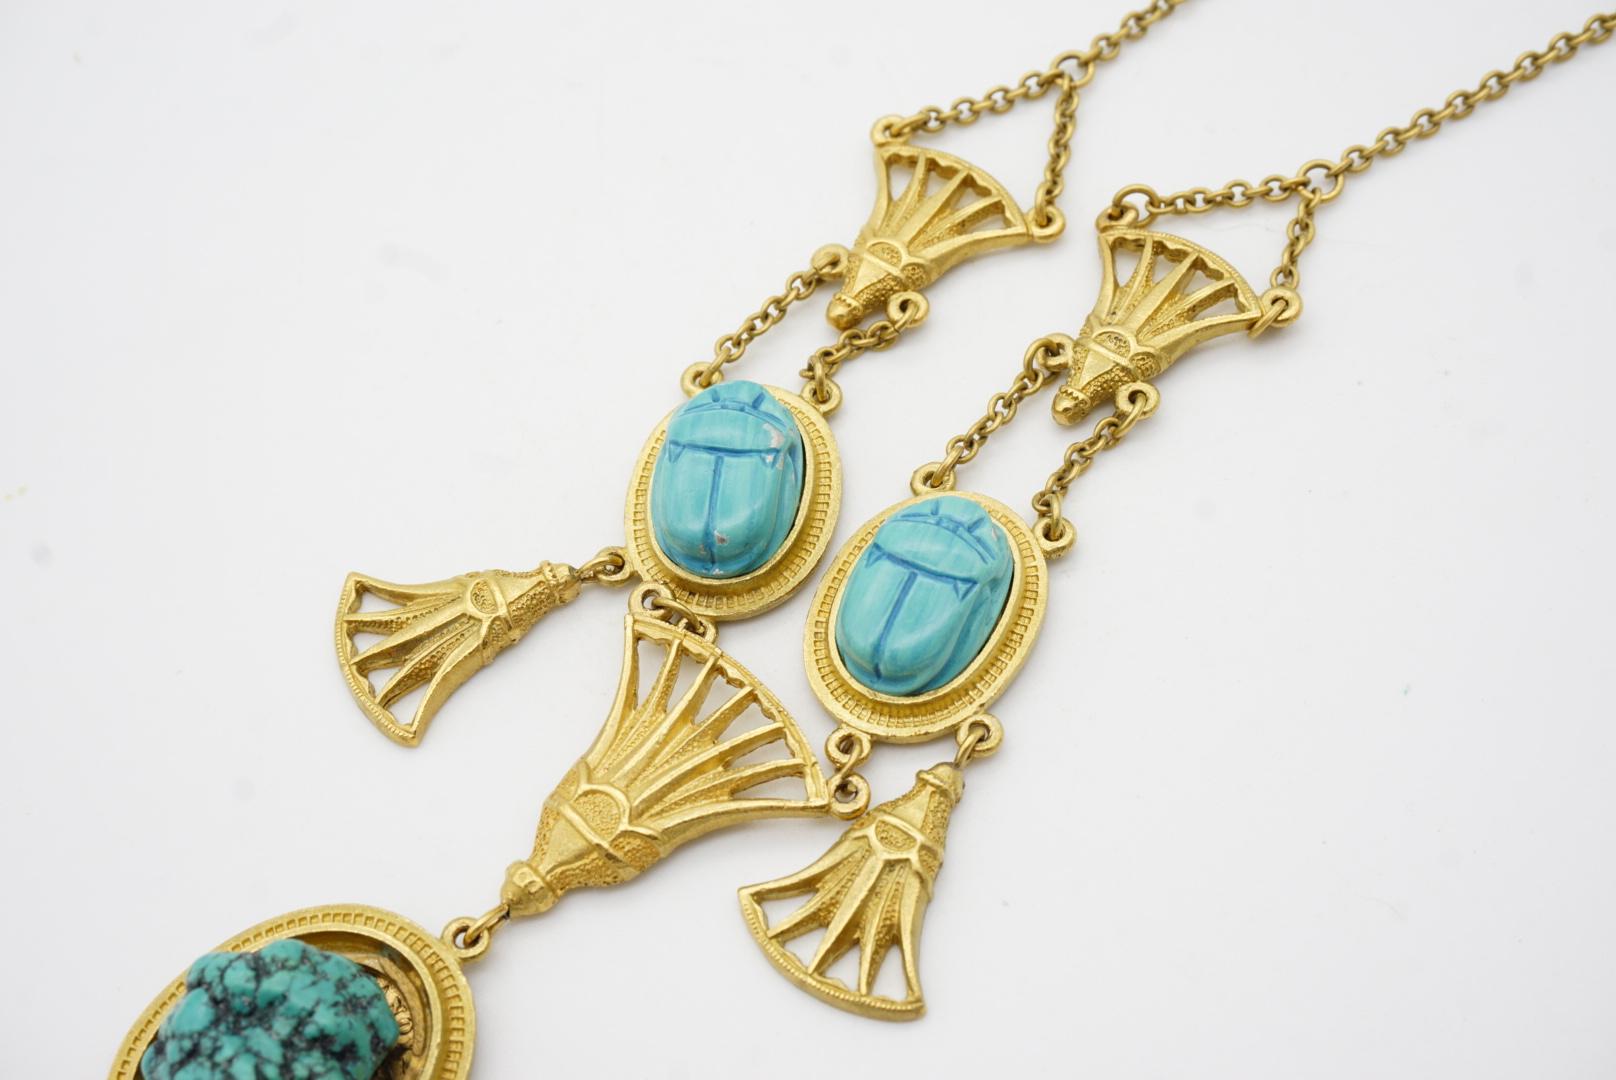 CHRISTIAN DIOR by John Galliano 2004 Egyptian Revival Turquoise Scarab Necklace For Sale 8